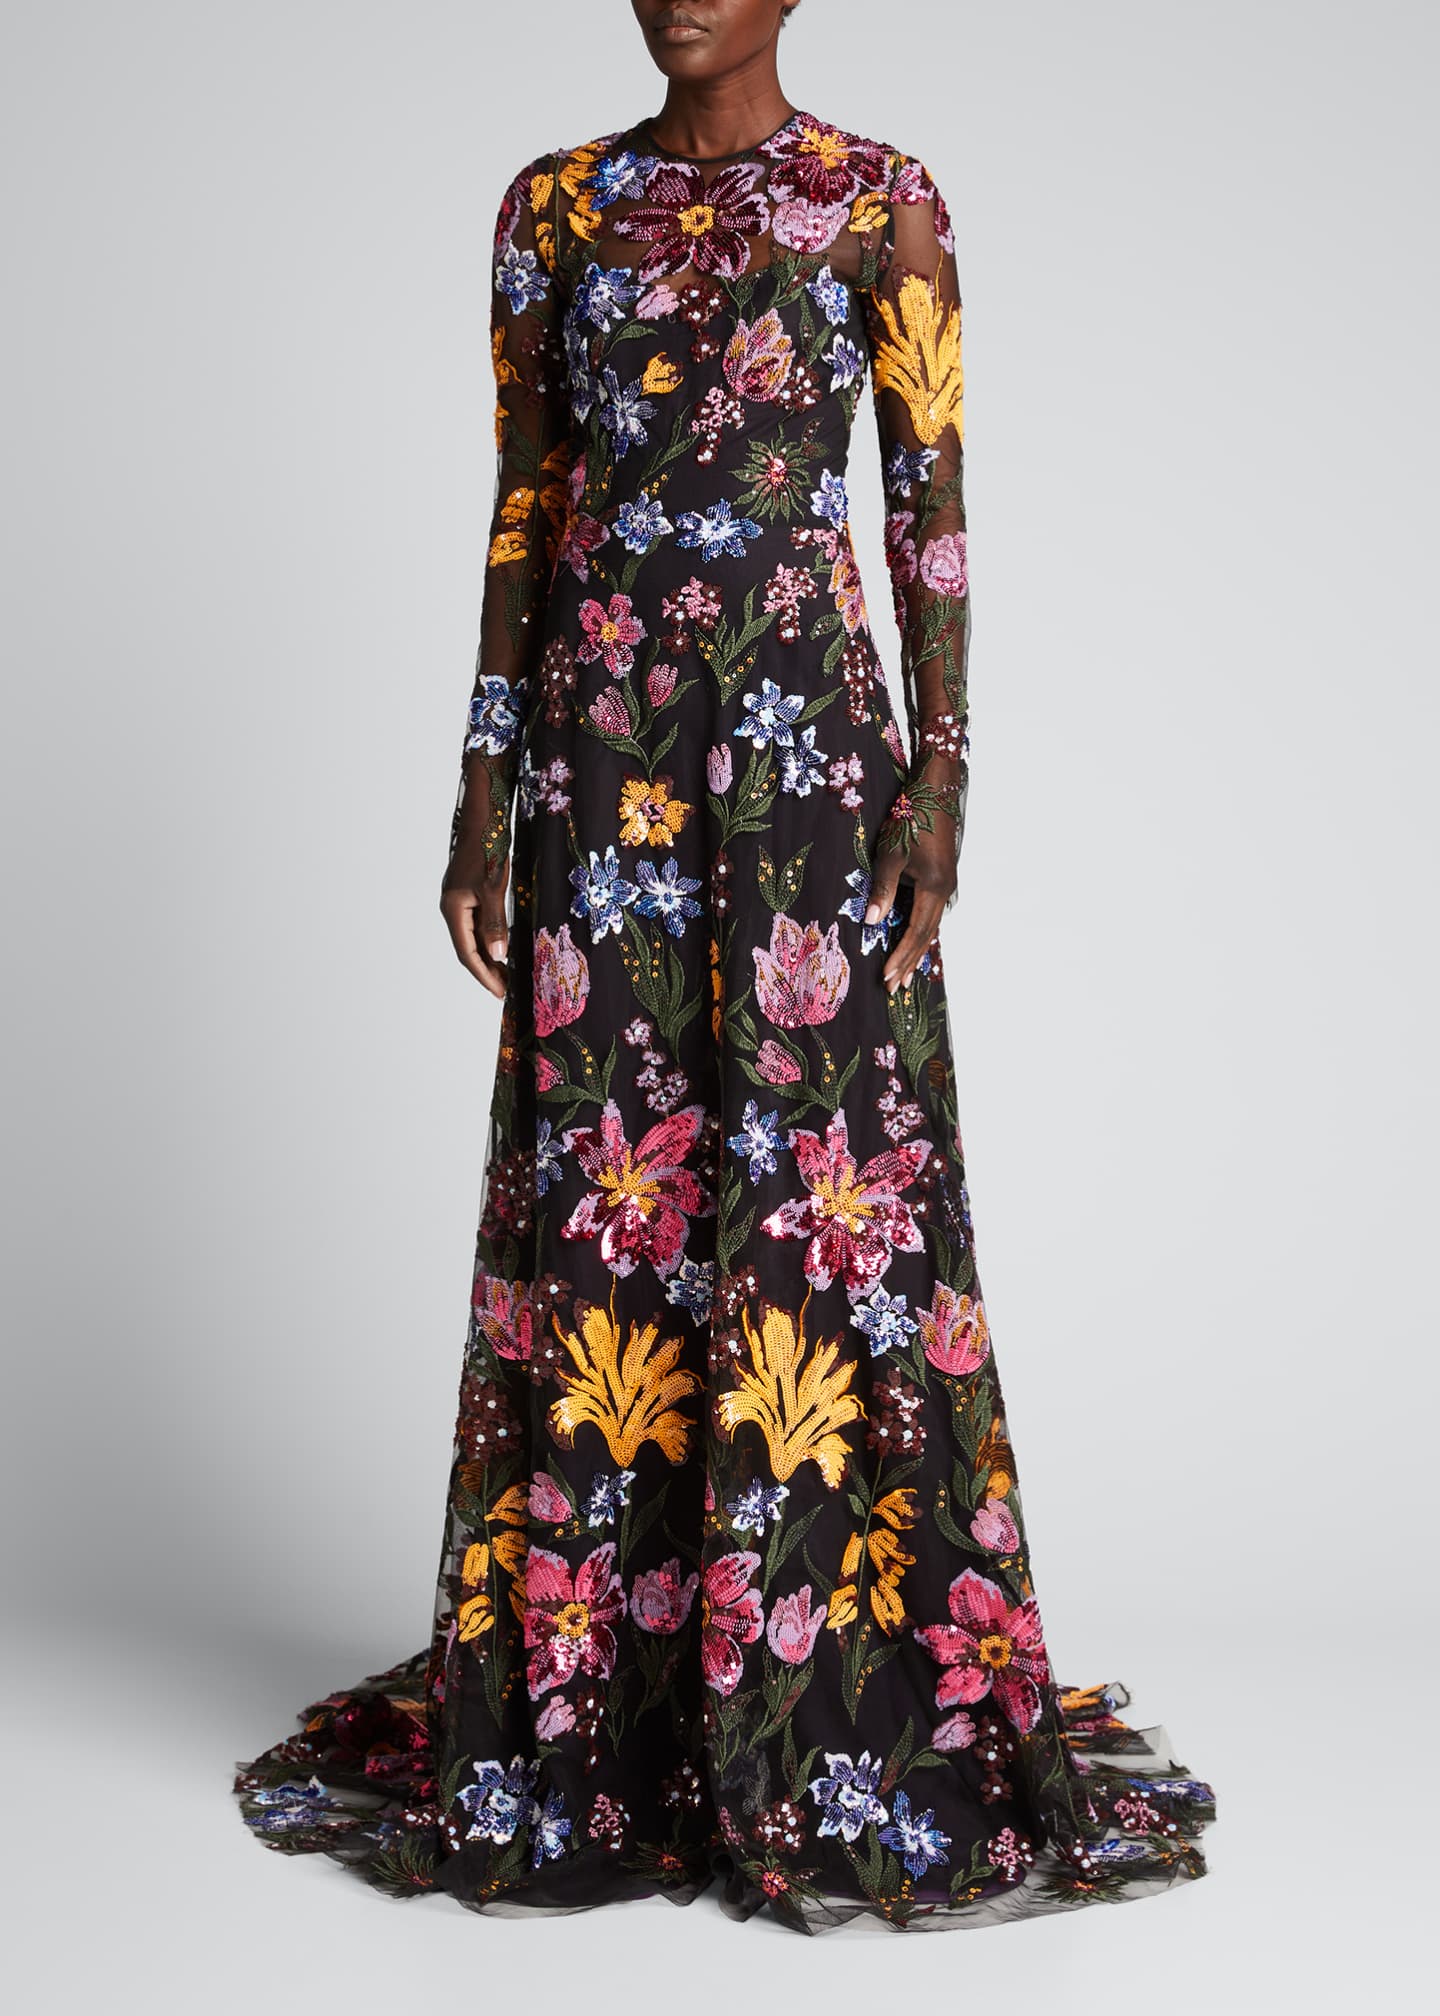 Naeem Khan Floral Sequin-Embroidered Tulle Illusion Gown - Bergdorf Goodman